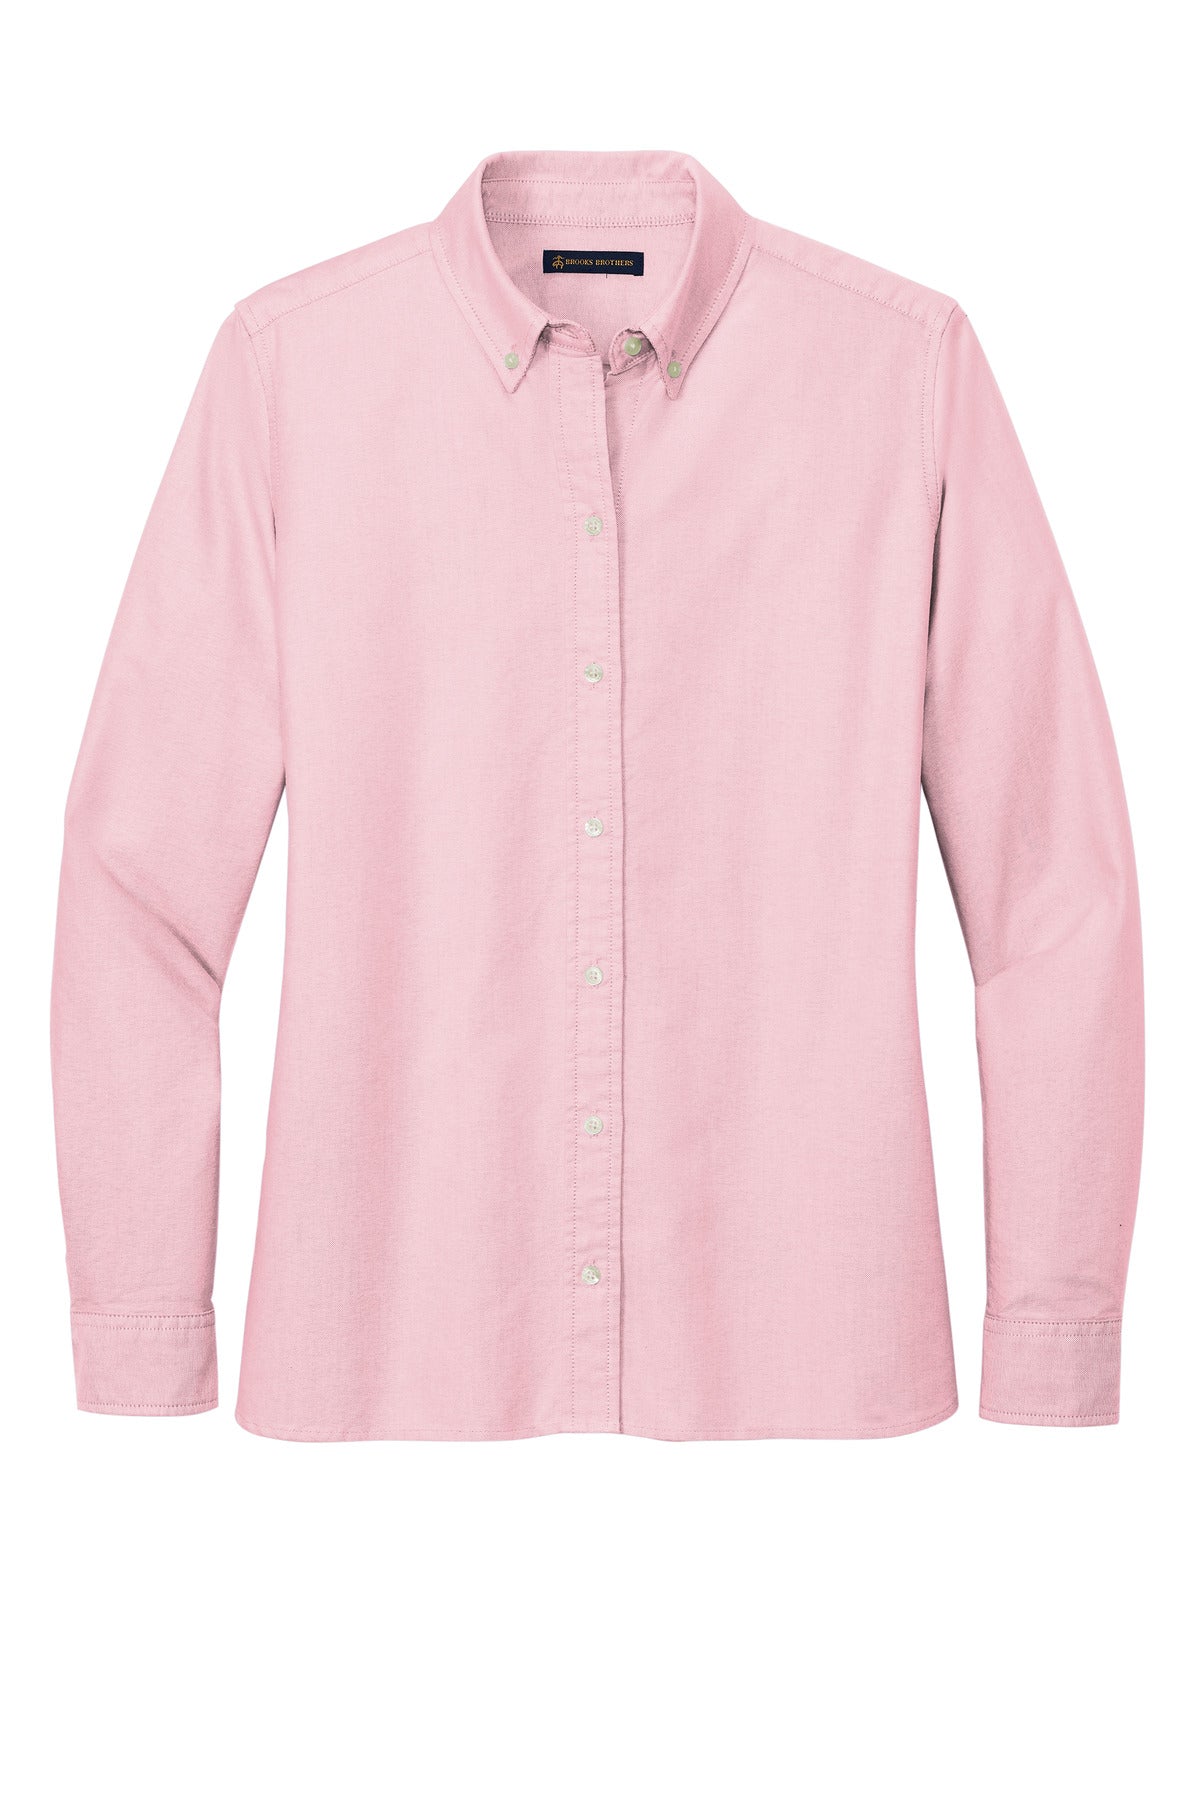 Brooks Brothers® Women's Casual Oxford Cloth Shirt BB18005